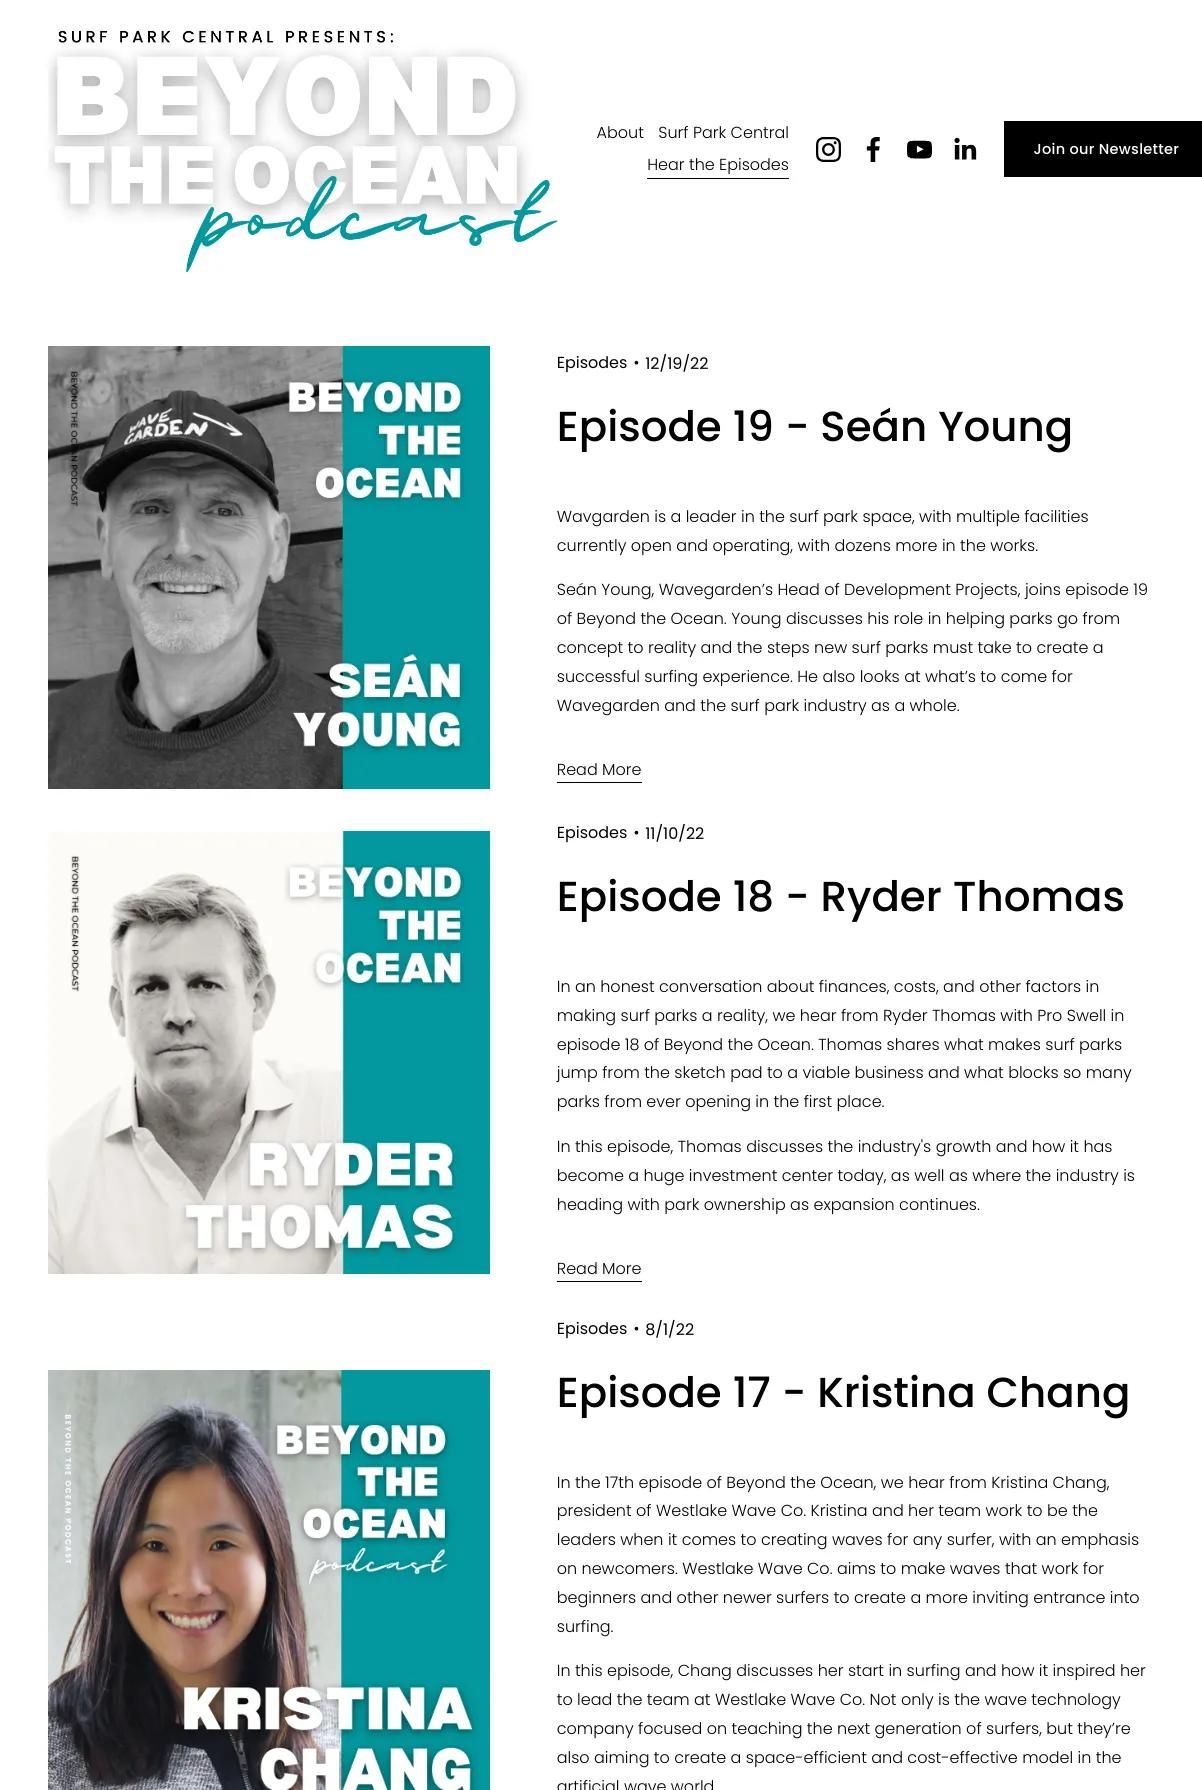 Screenshot 3 of Beyond the Ocean Podcast (Example Squarespace Podcast Website)